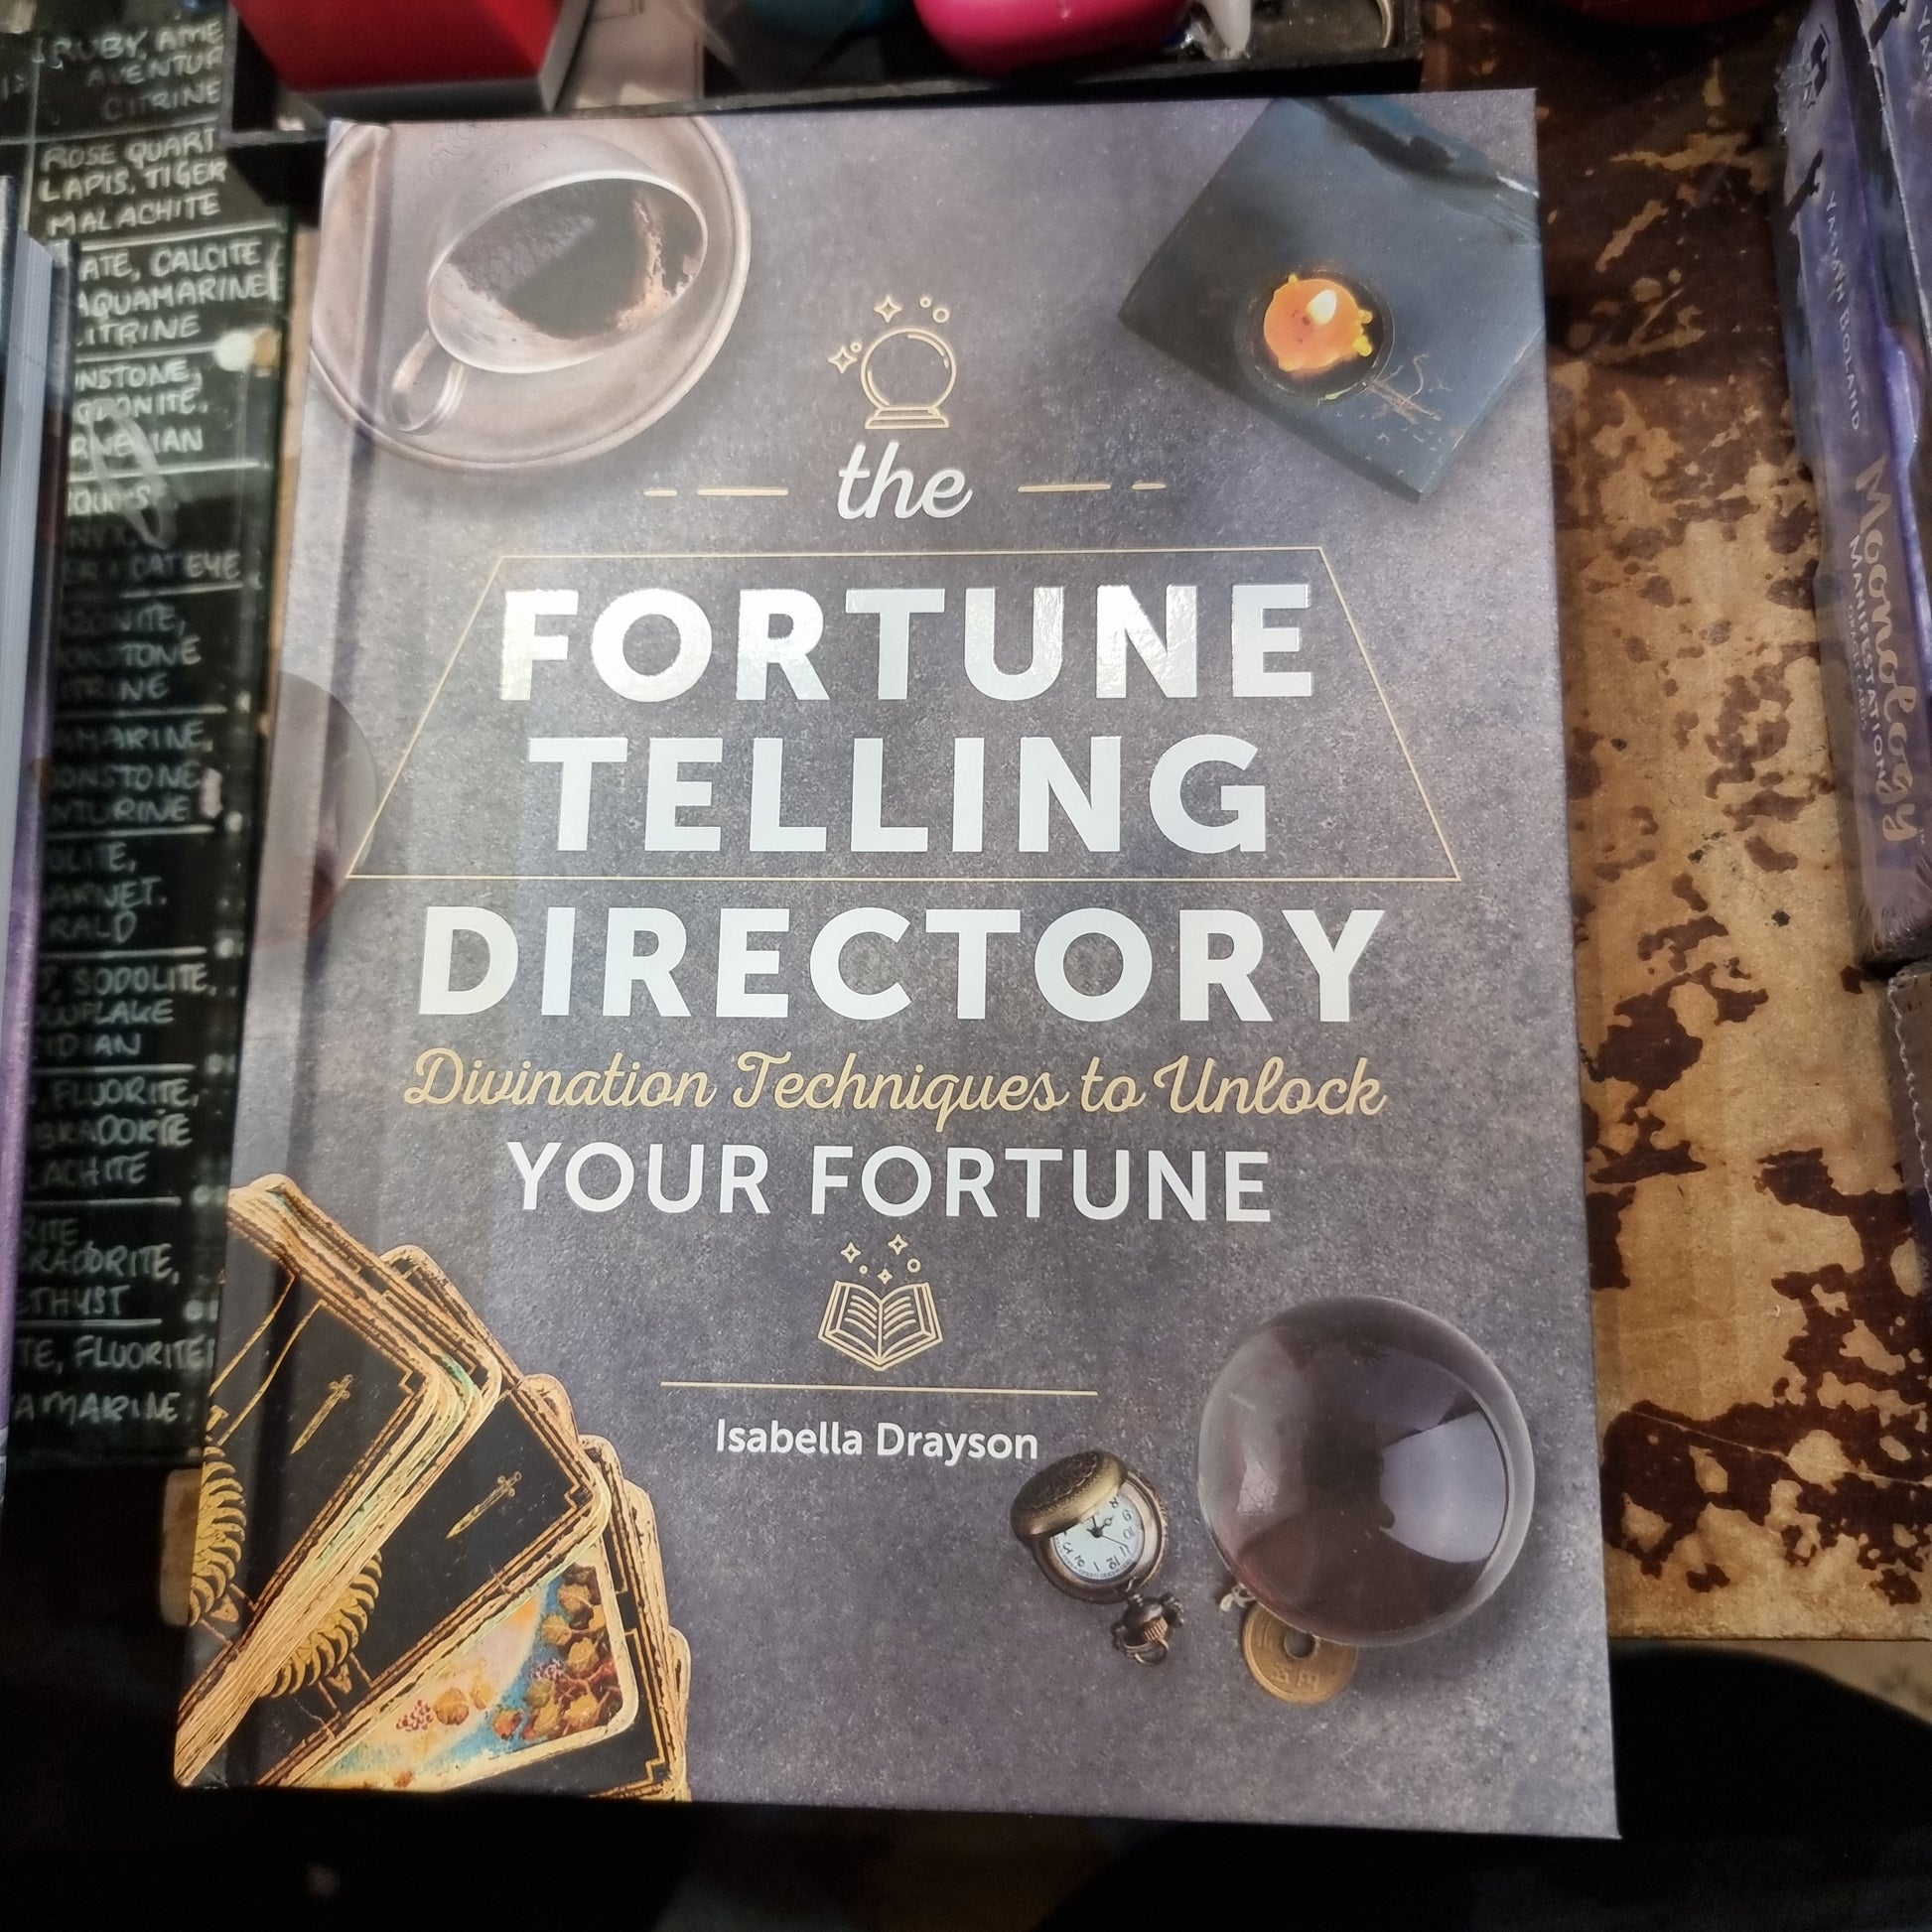 The fortune telling directory - Rivendell Shop